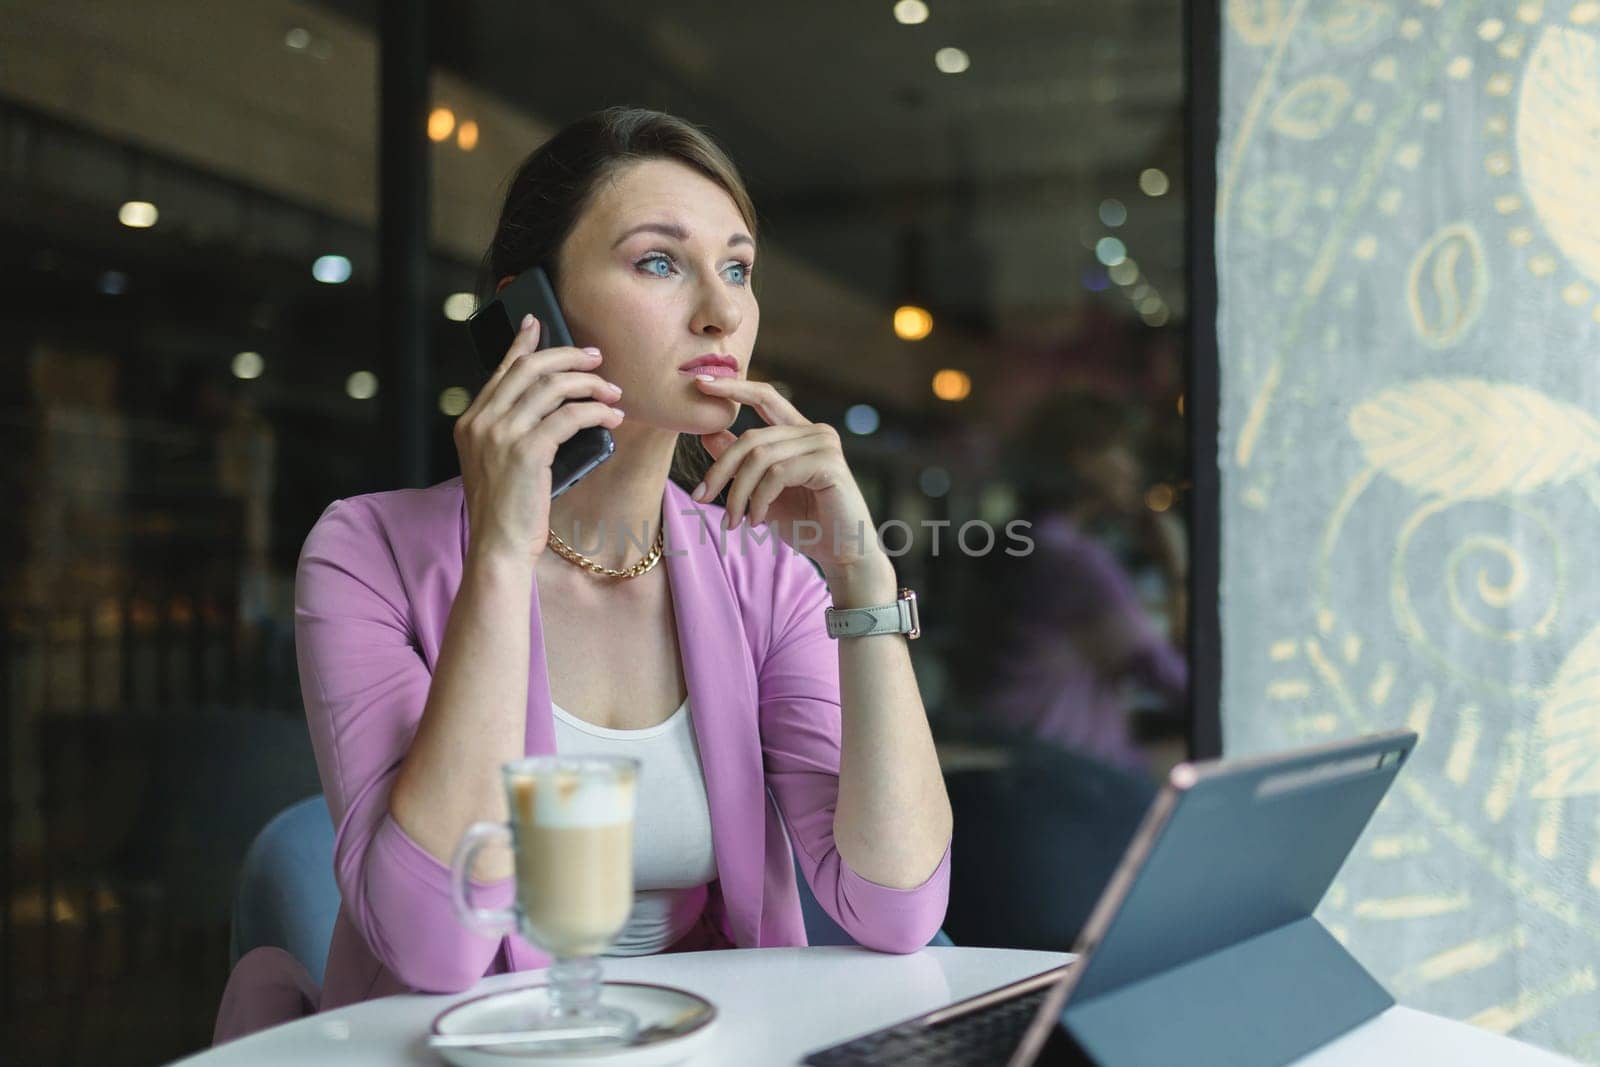 Thoughtful business woman talking on the phone with clients or business partners, making difficult decisions while sitting in coffee shop with latte and laptop.